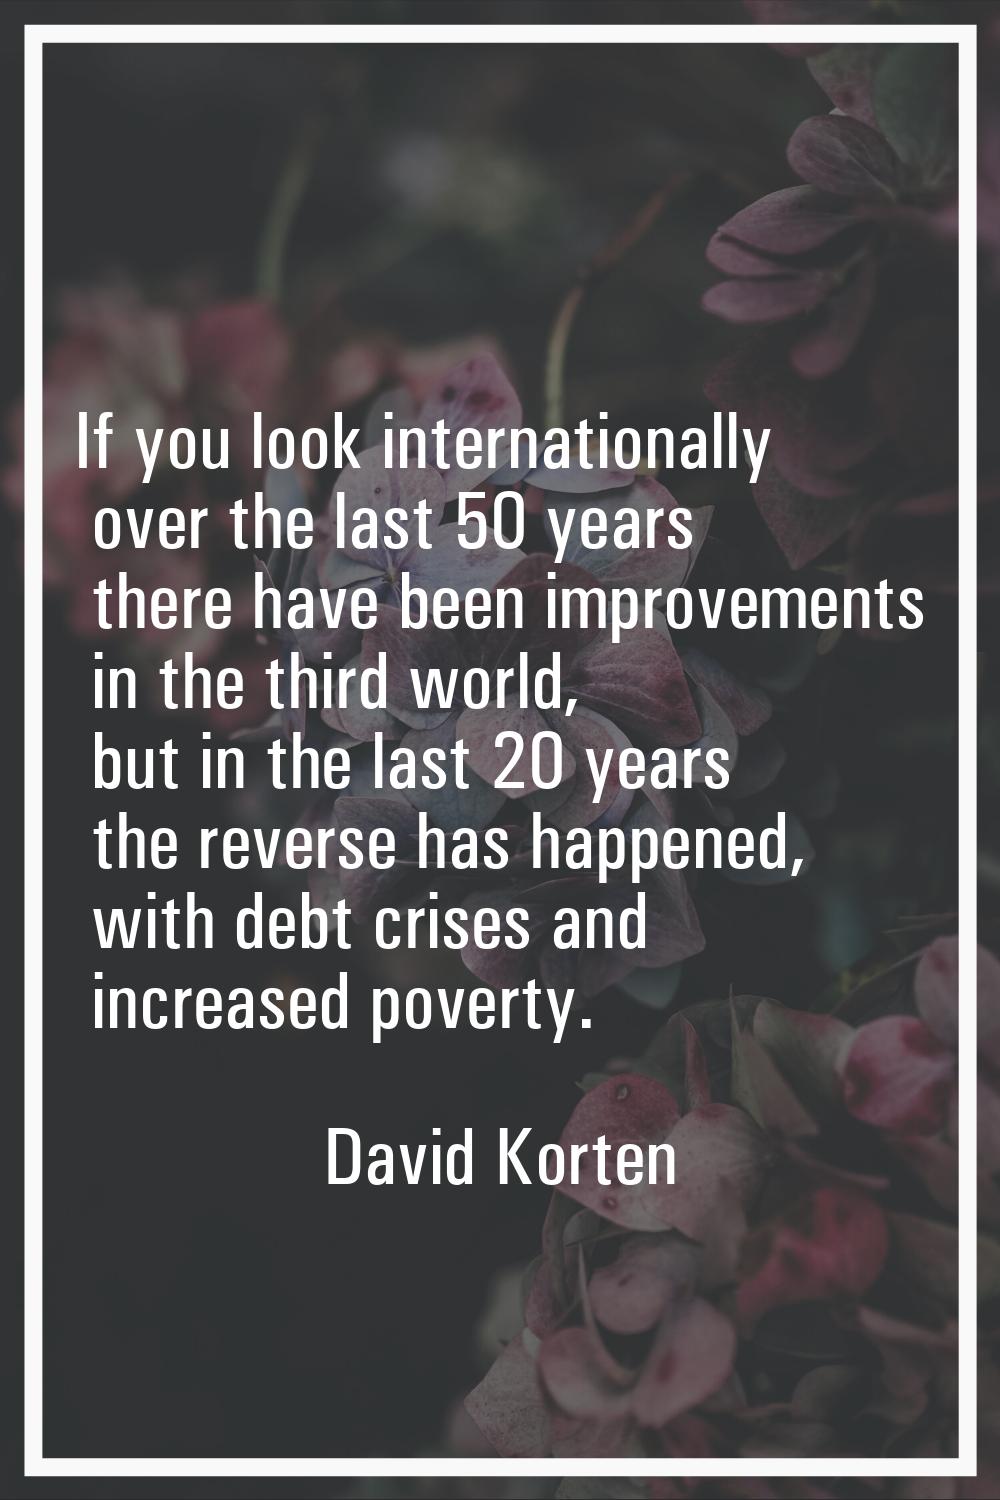 If you look internationally over the last 50 years there have been improvements in the third world,